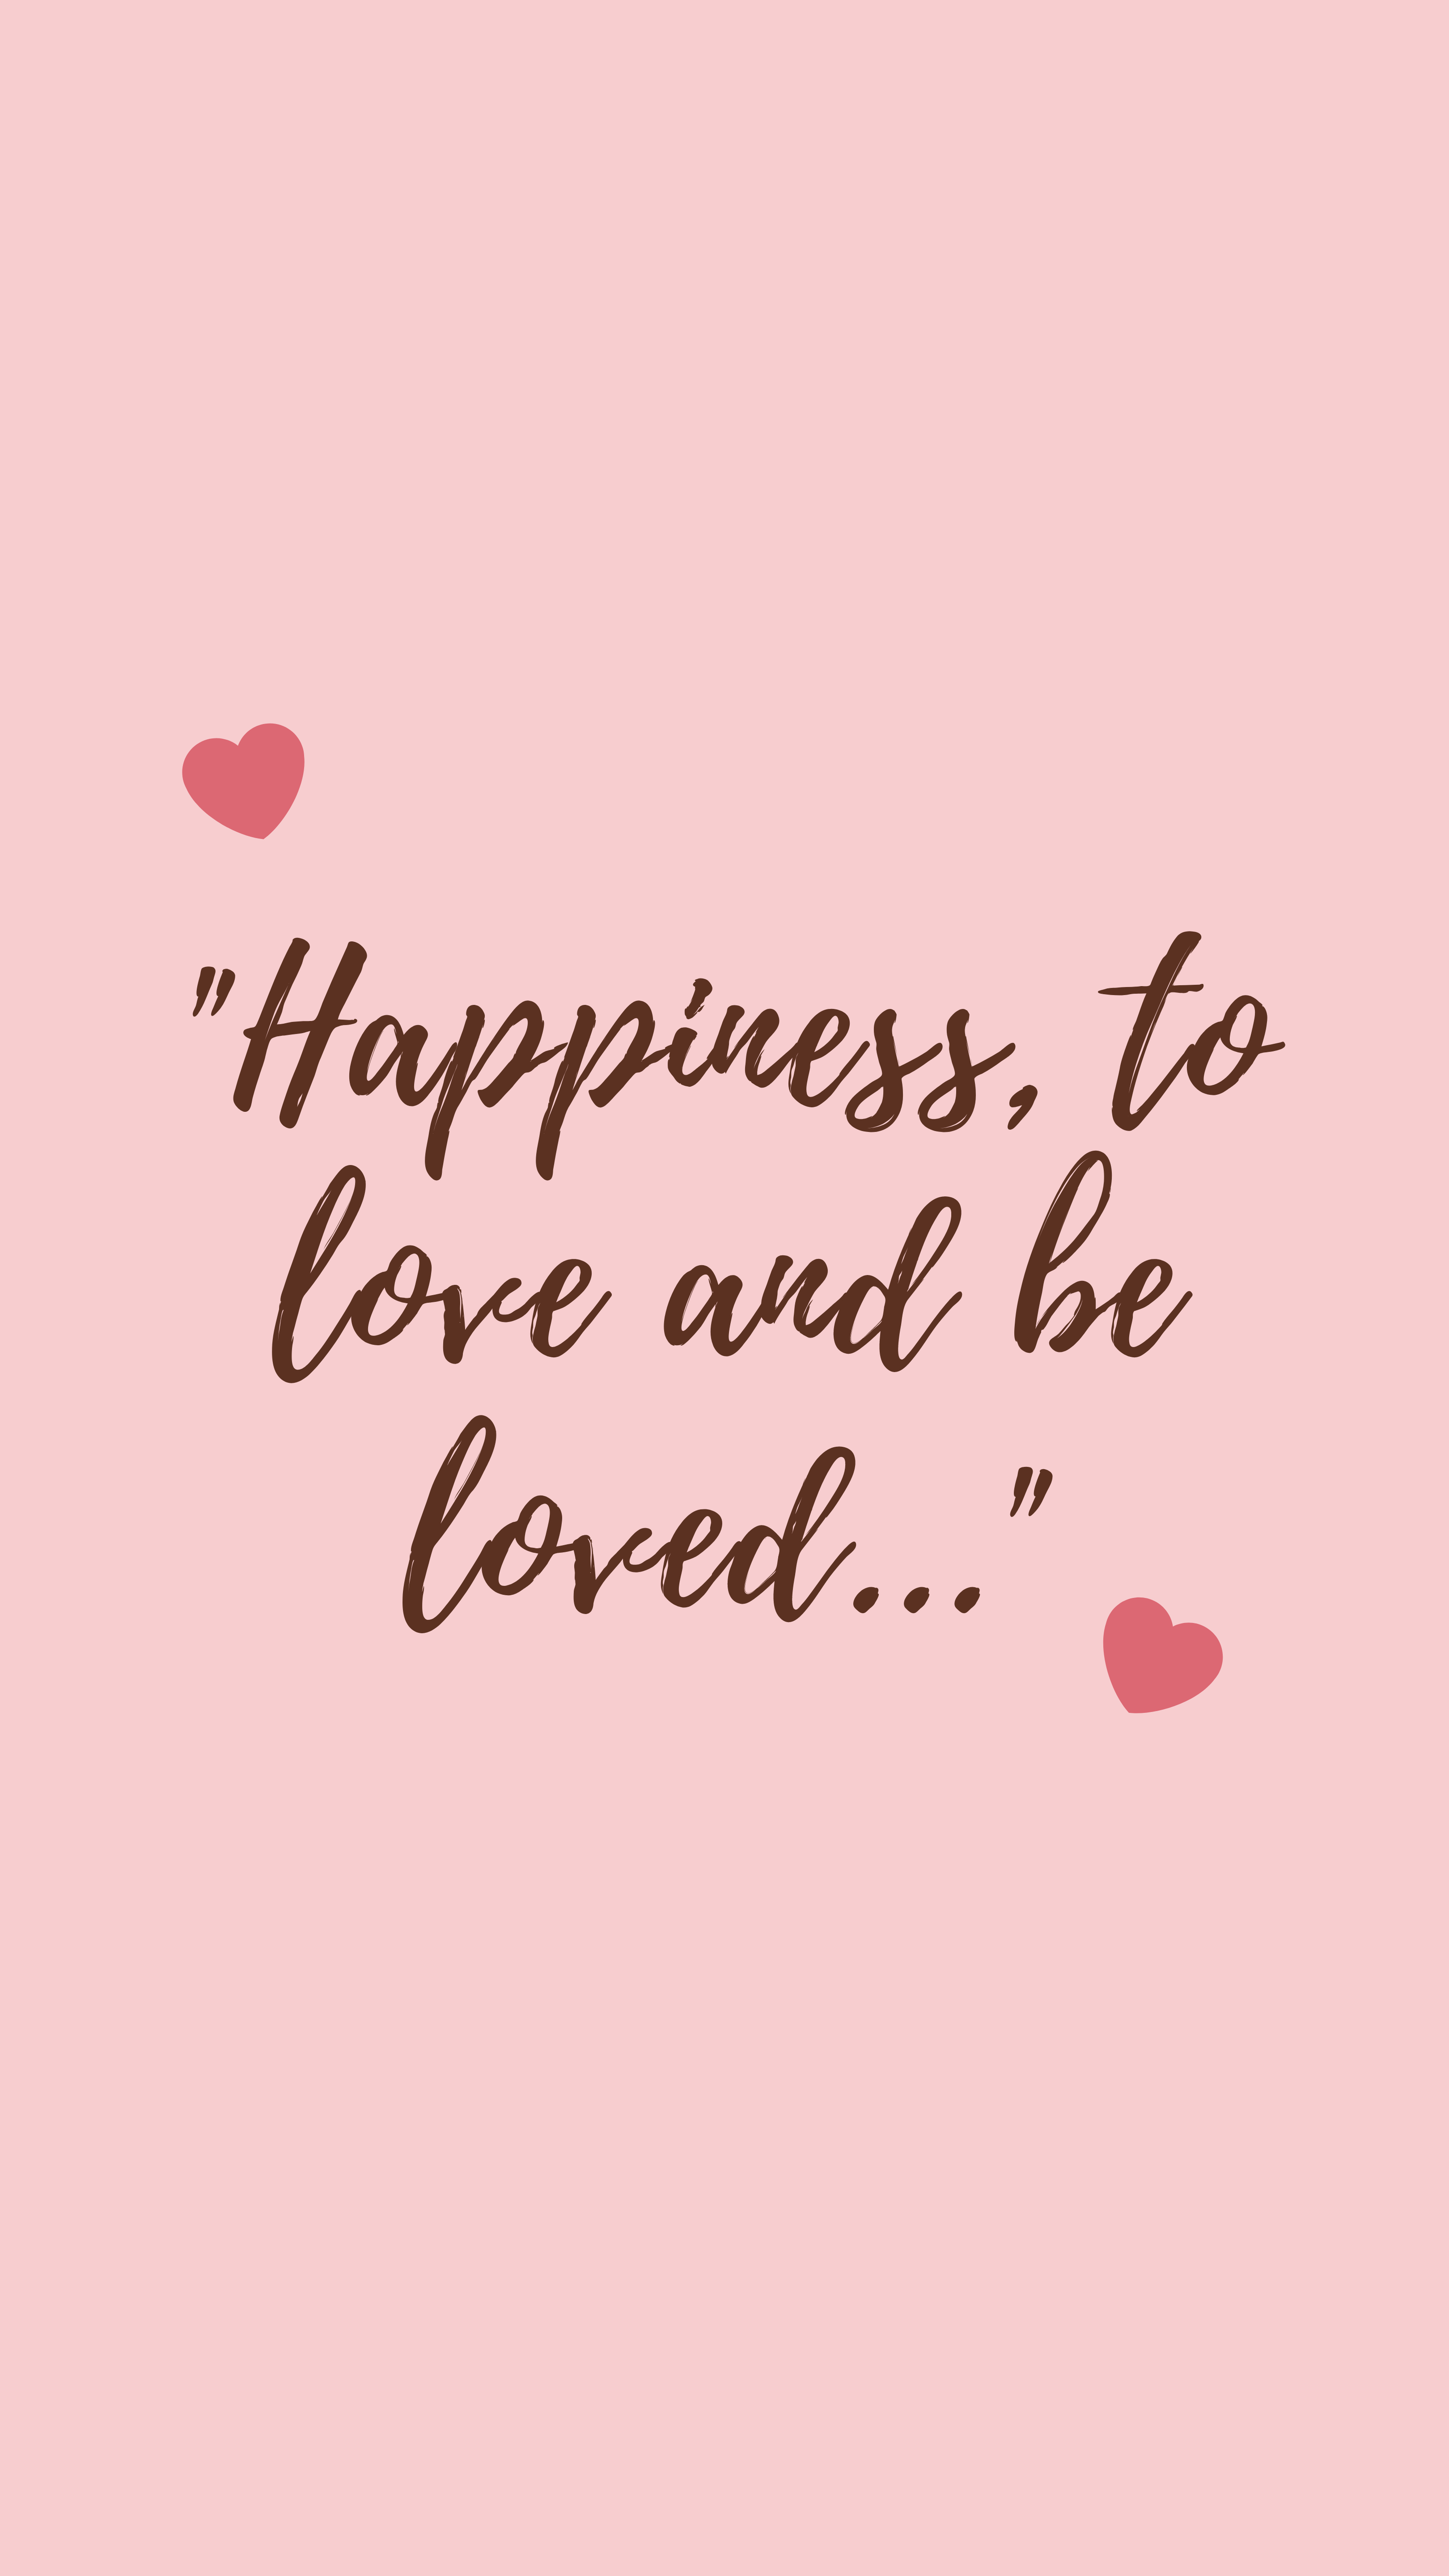 quote, happiness, love, words, phrase, quotation, feelings